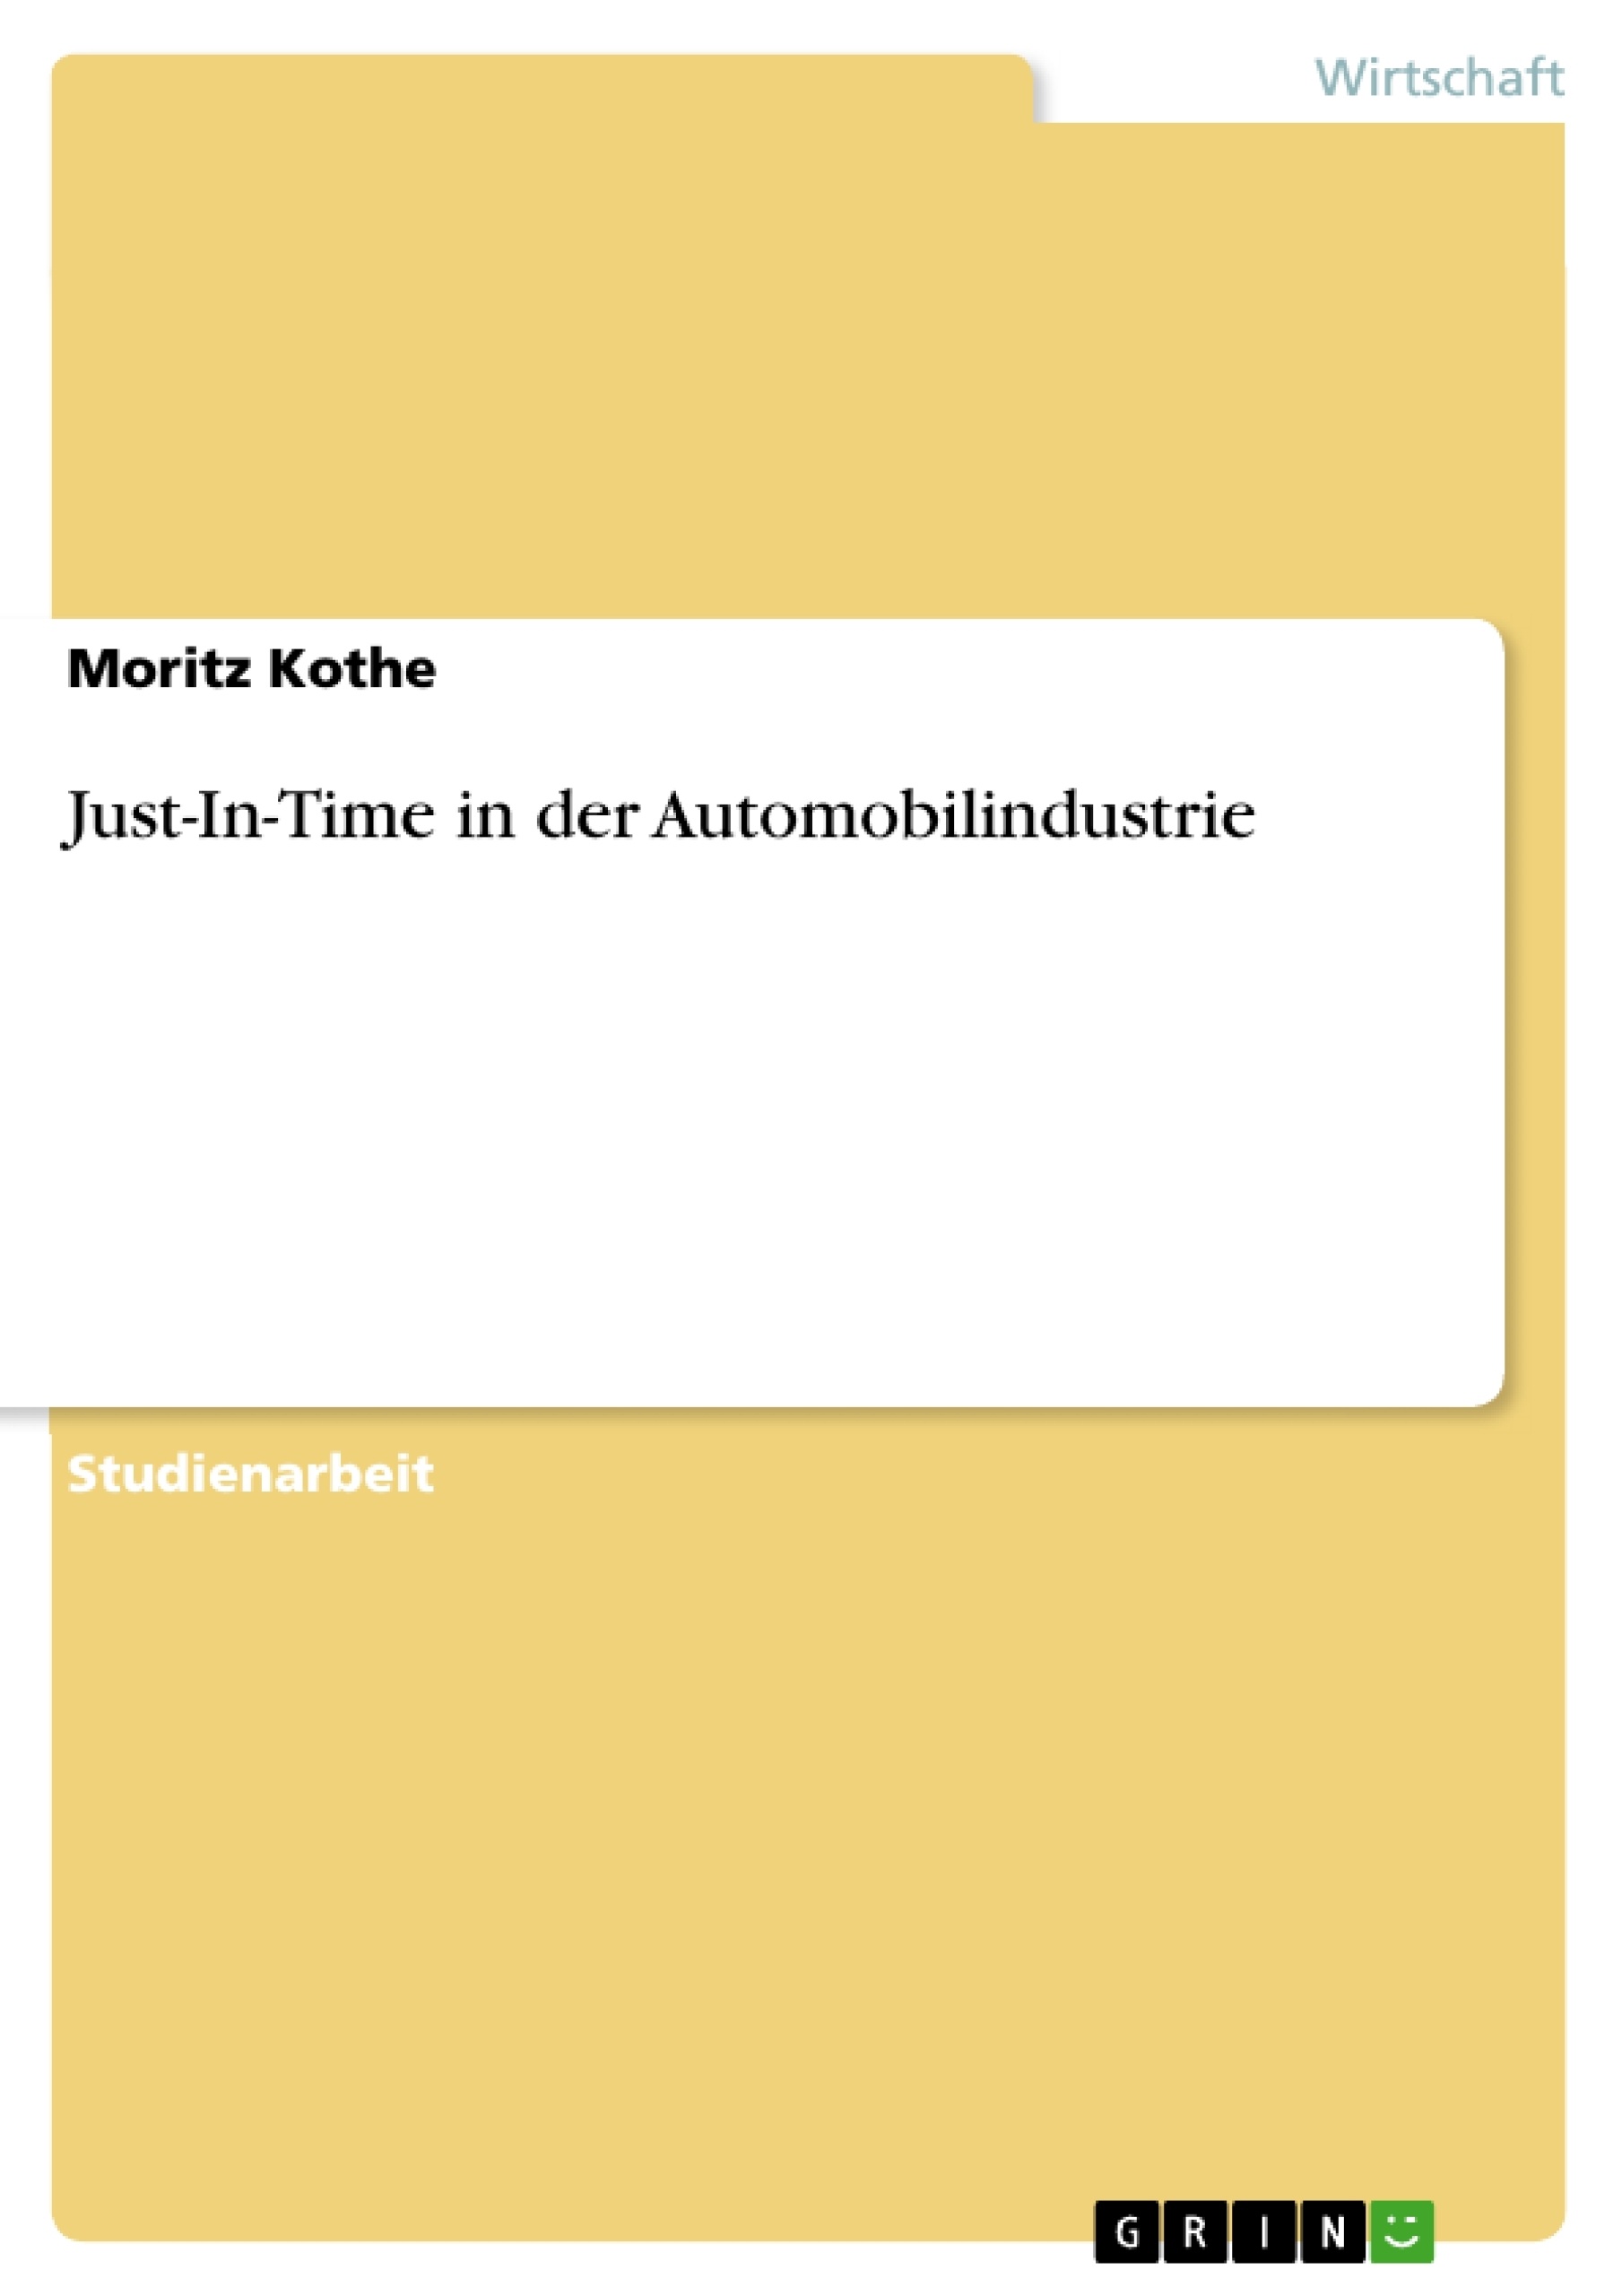 Título: Just-In-Time in der Automobilindustrie